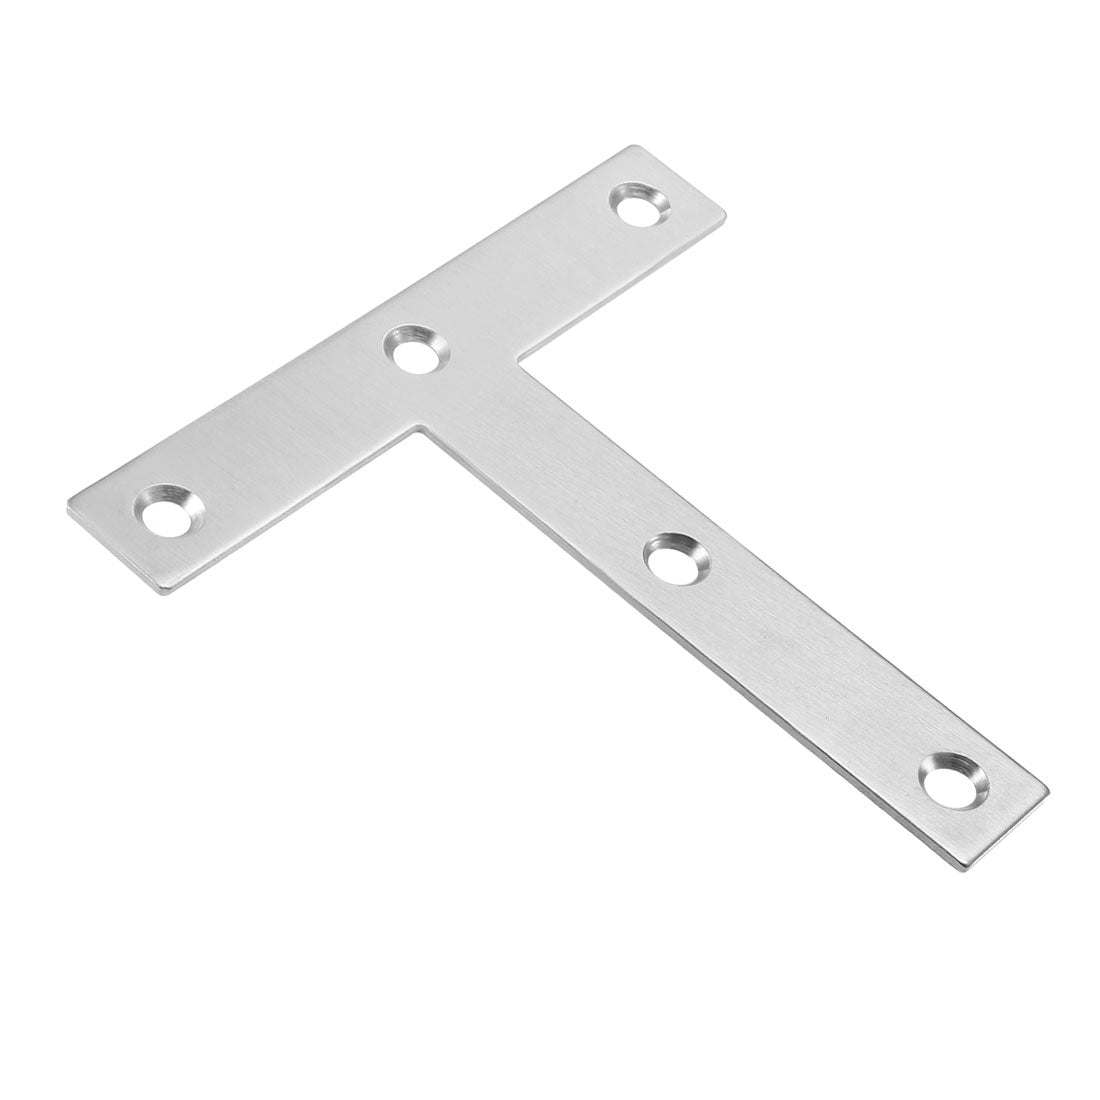 uxcell Uxcell Flat T Shape Repair Mending Plate, 120mmx120mm, Stainless steel Joining Bracket Support Brace, 1 Pcs